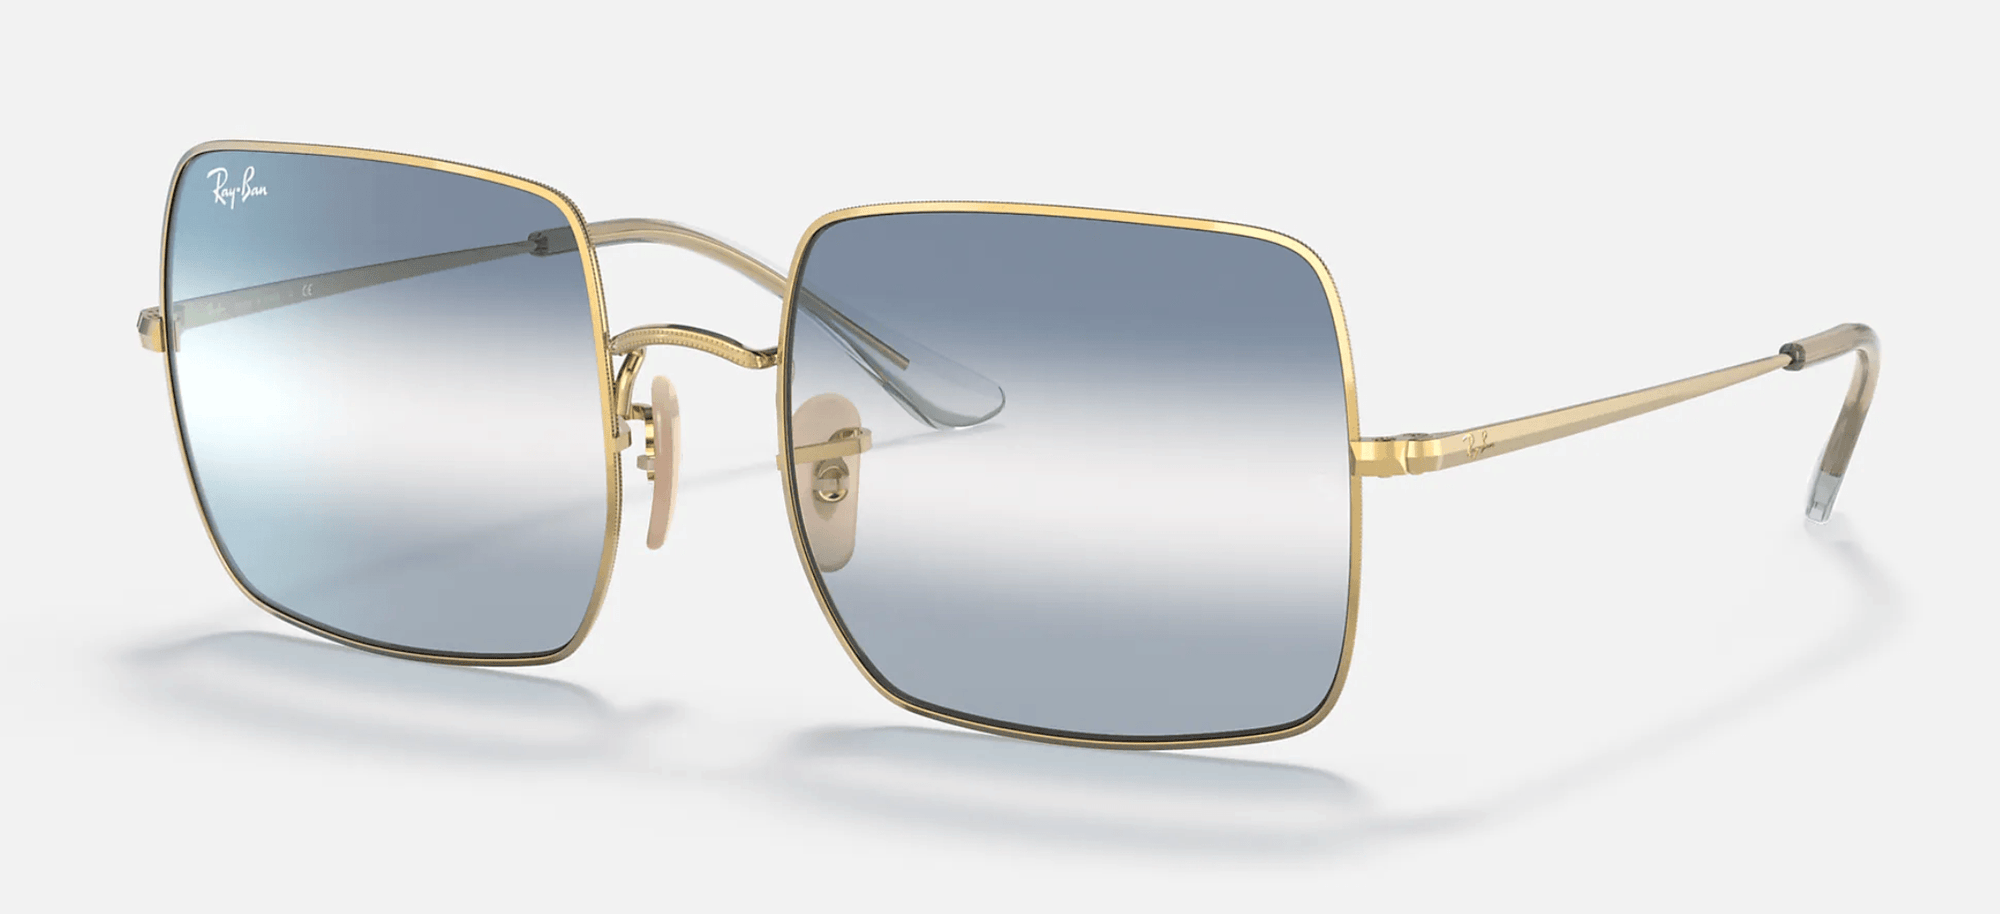 RAY-BAN Square 1971 Gold - Clear Blue Gradient Sunglasses Sunglasses Ray-Ban 